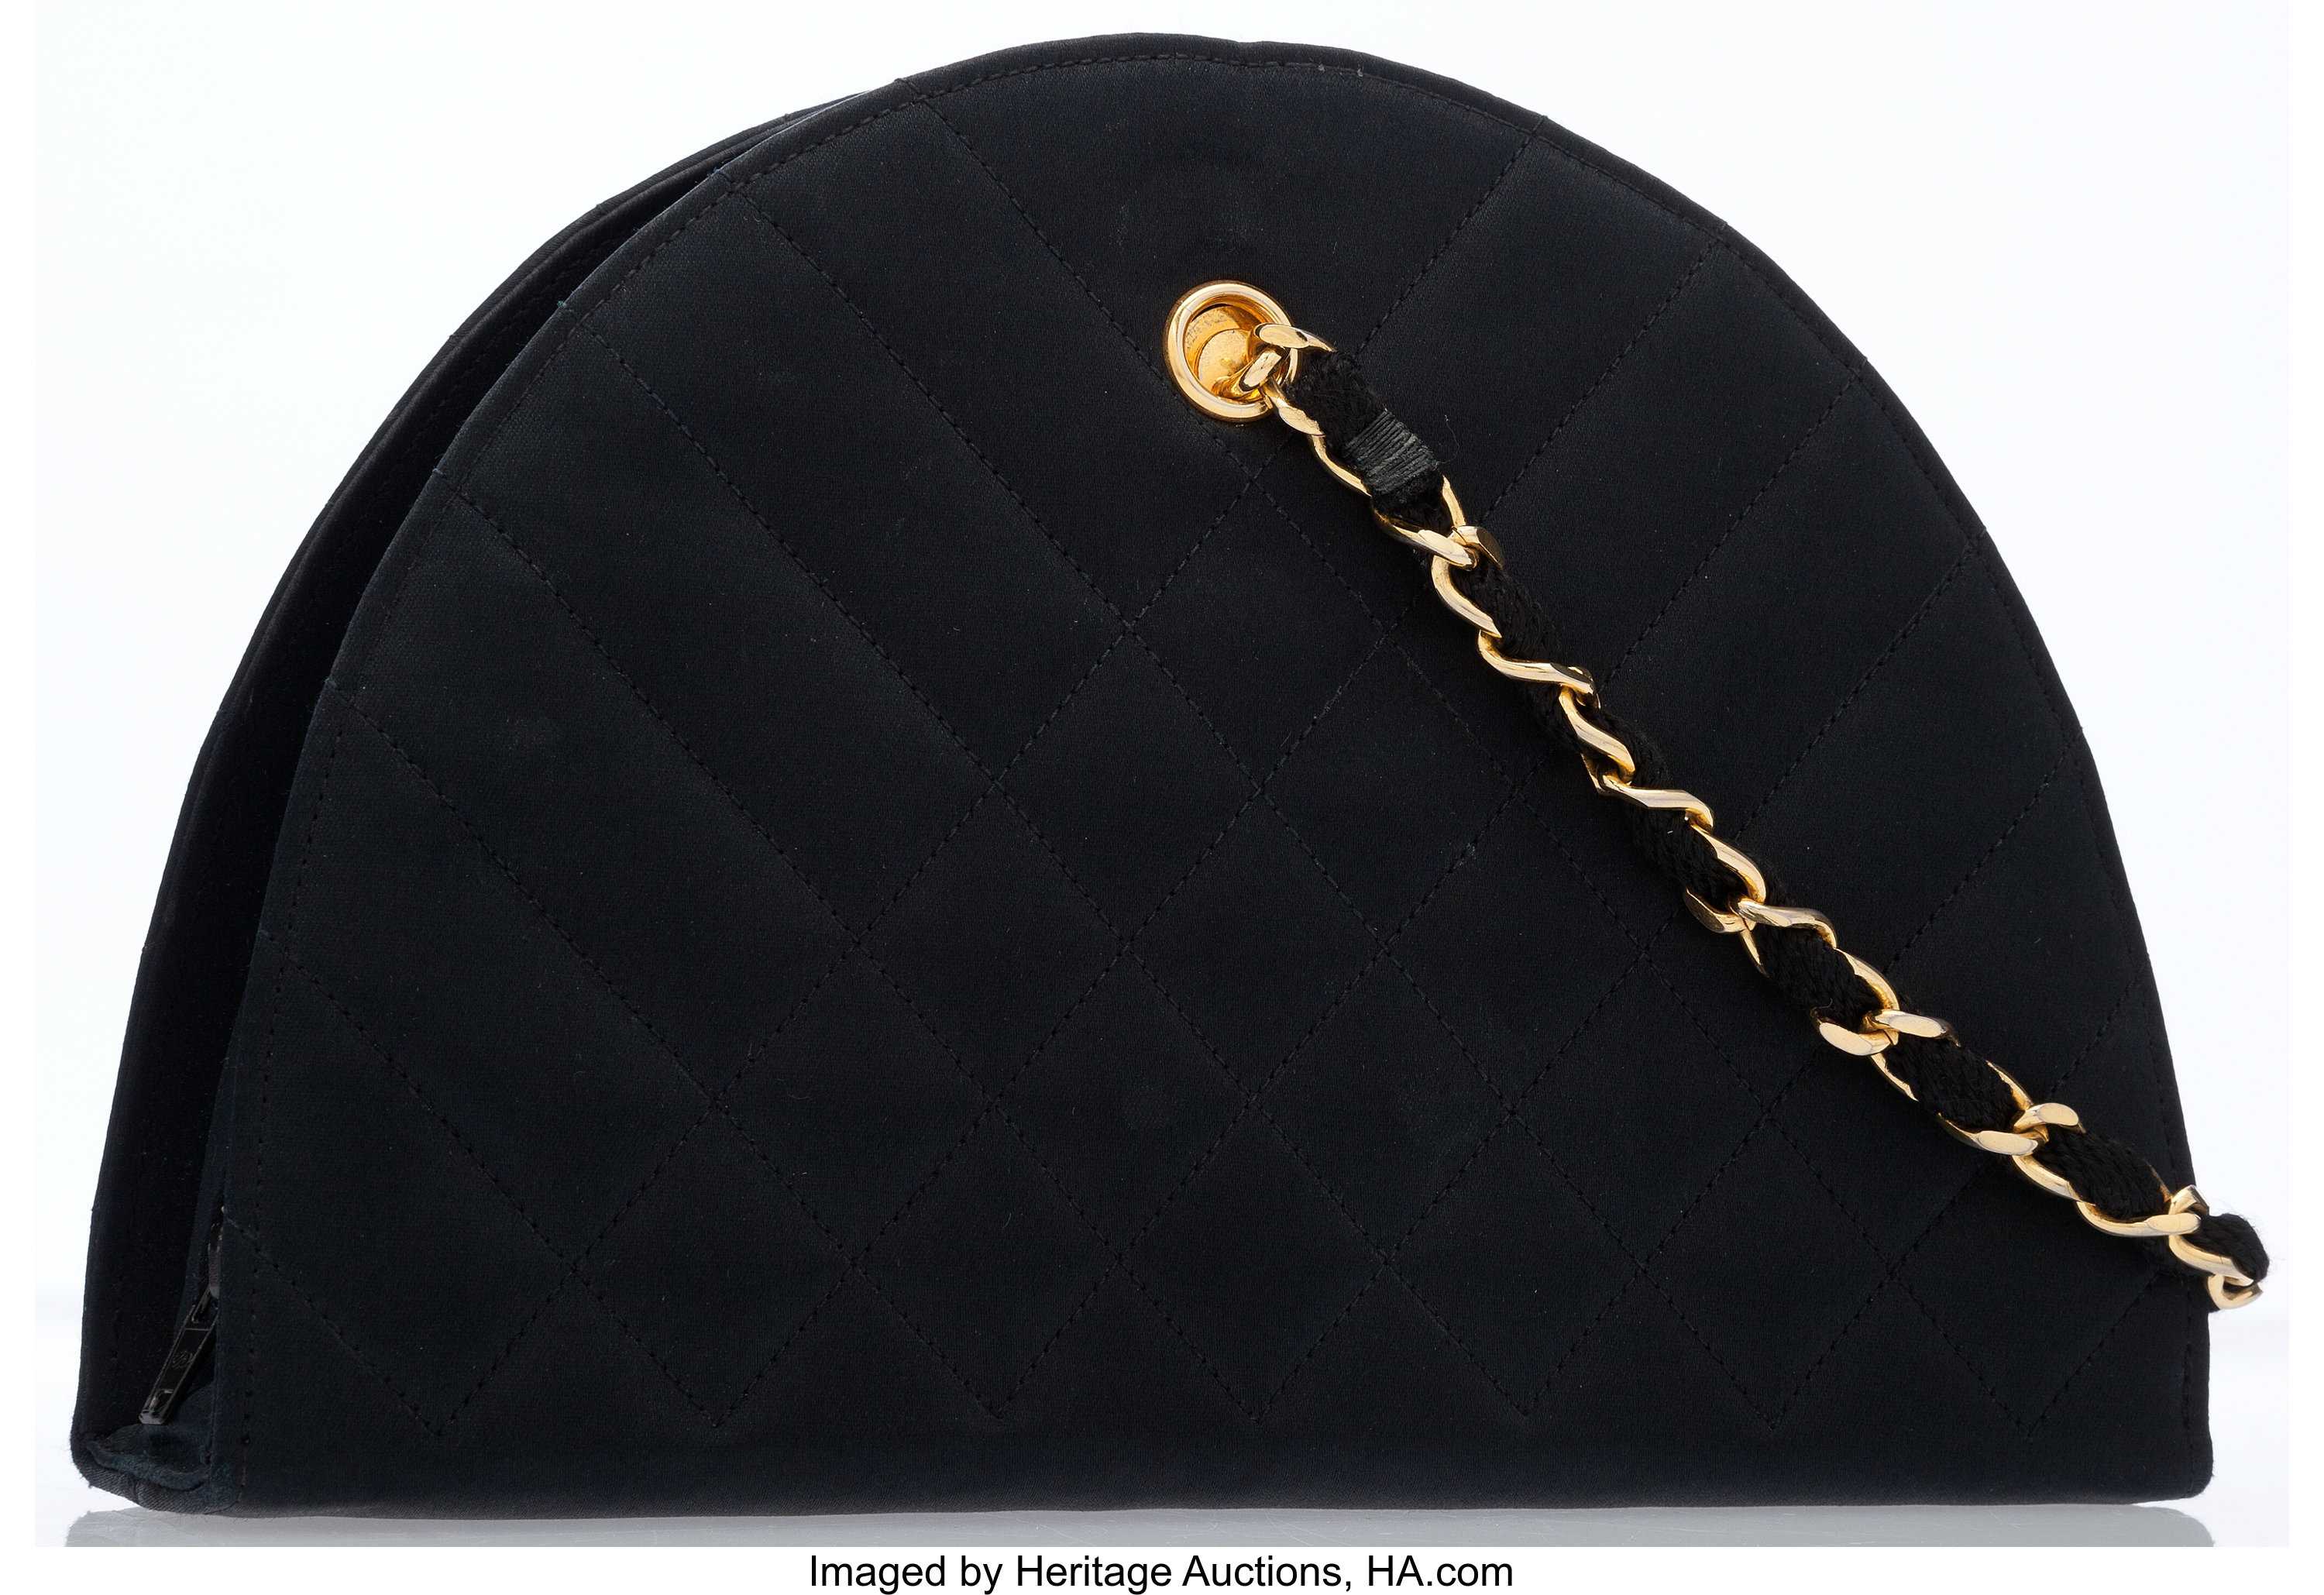 chanel black quilted purse